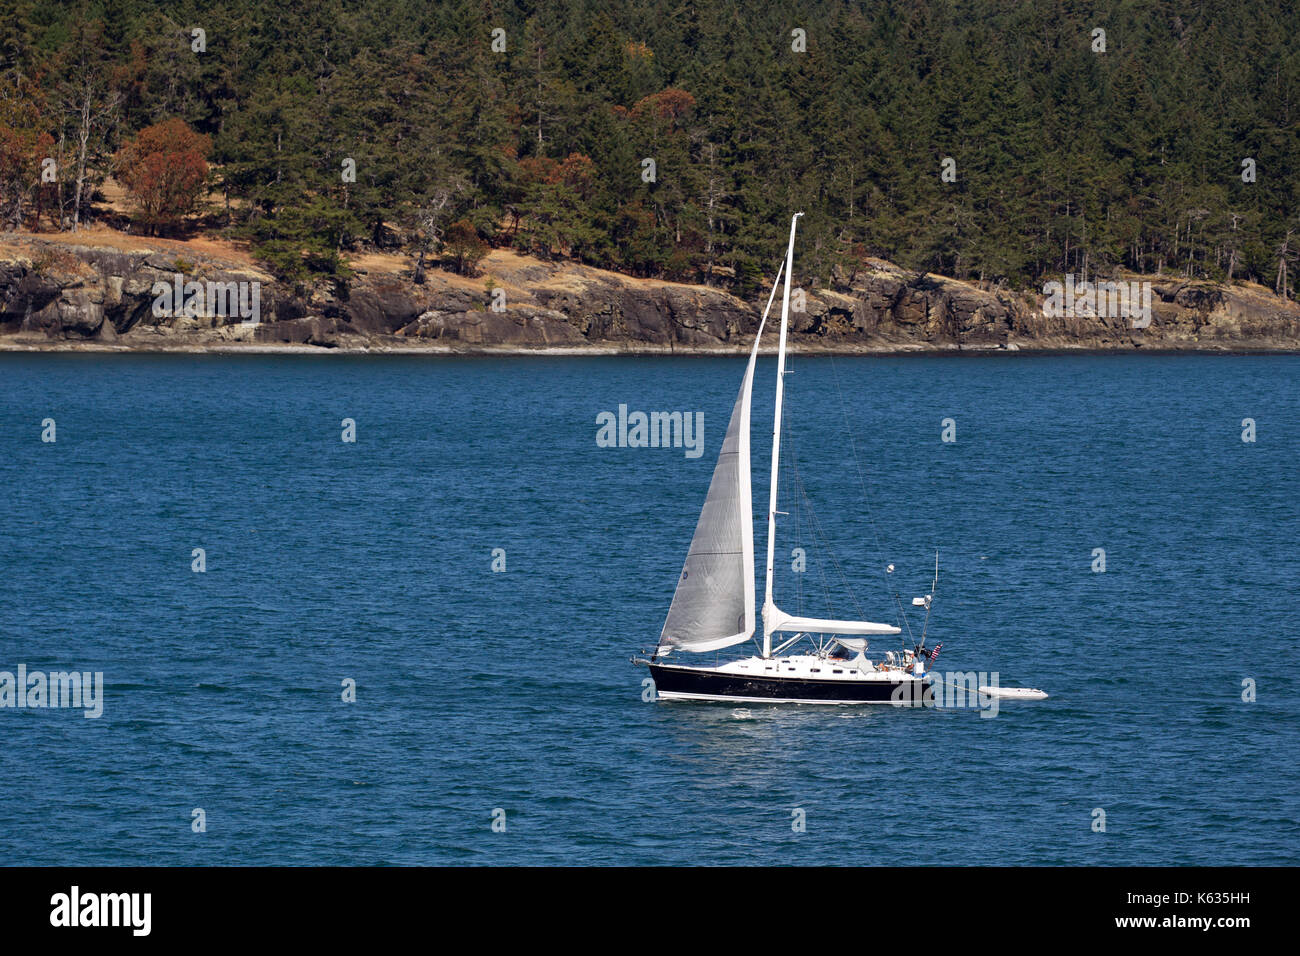 Sailing boat in the Salish Sea between the Gulf Islands at Vancouver Island, British Columbia, Canada. Stock Photo